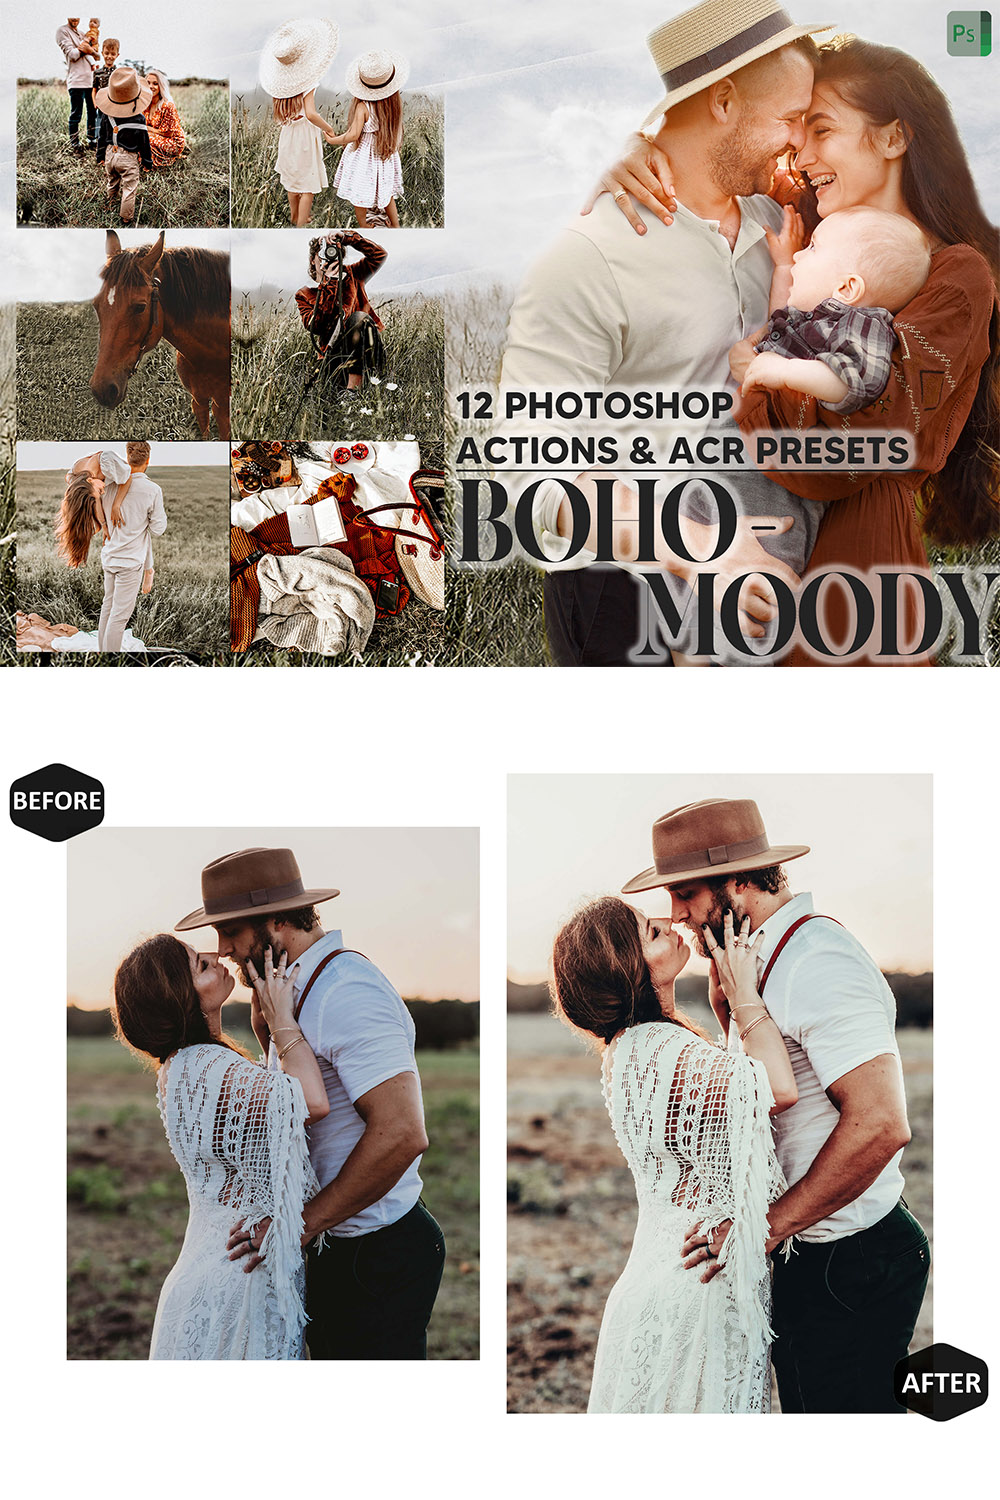 12 Photoshop Actions, Boho-Moody Ps Action, Rustic ACR Preset, Bohemian Ps Filter, Atn Portrait And Lifestyle Theme Instagram, Blogger pinterest preview image.